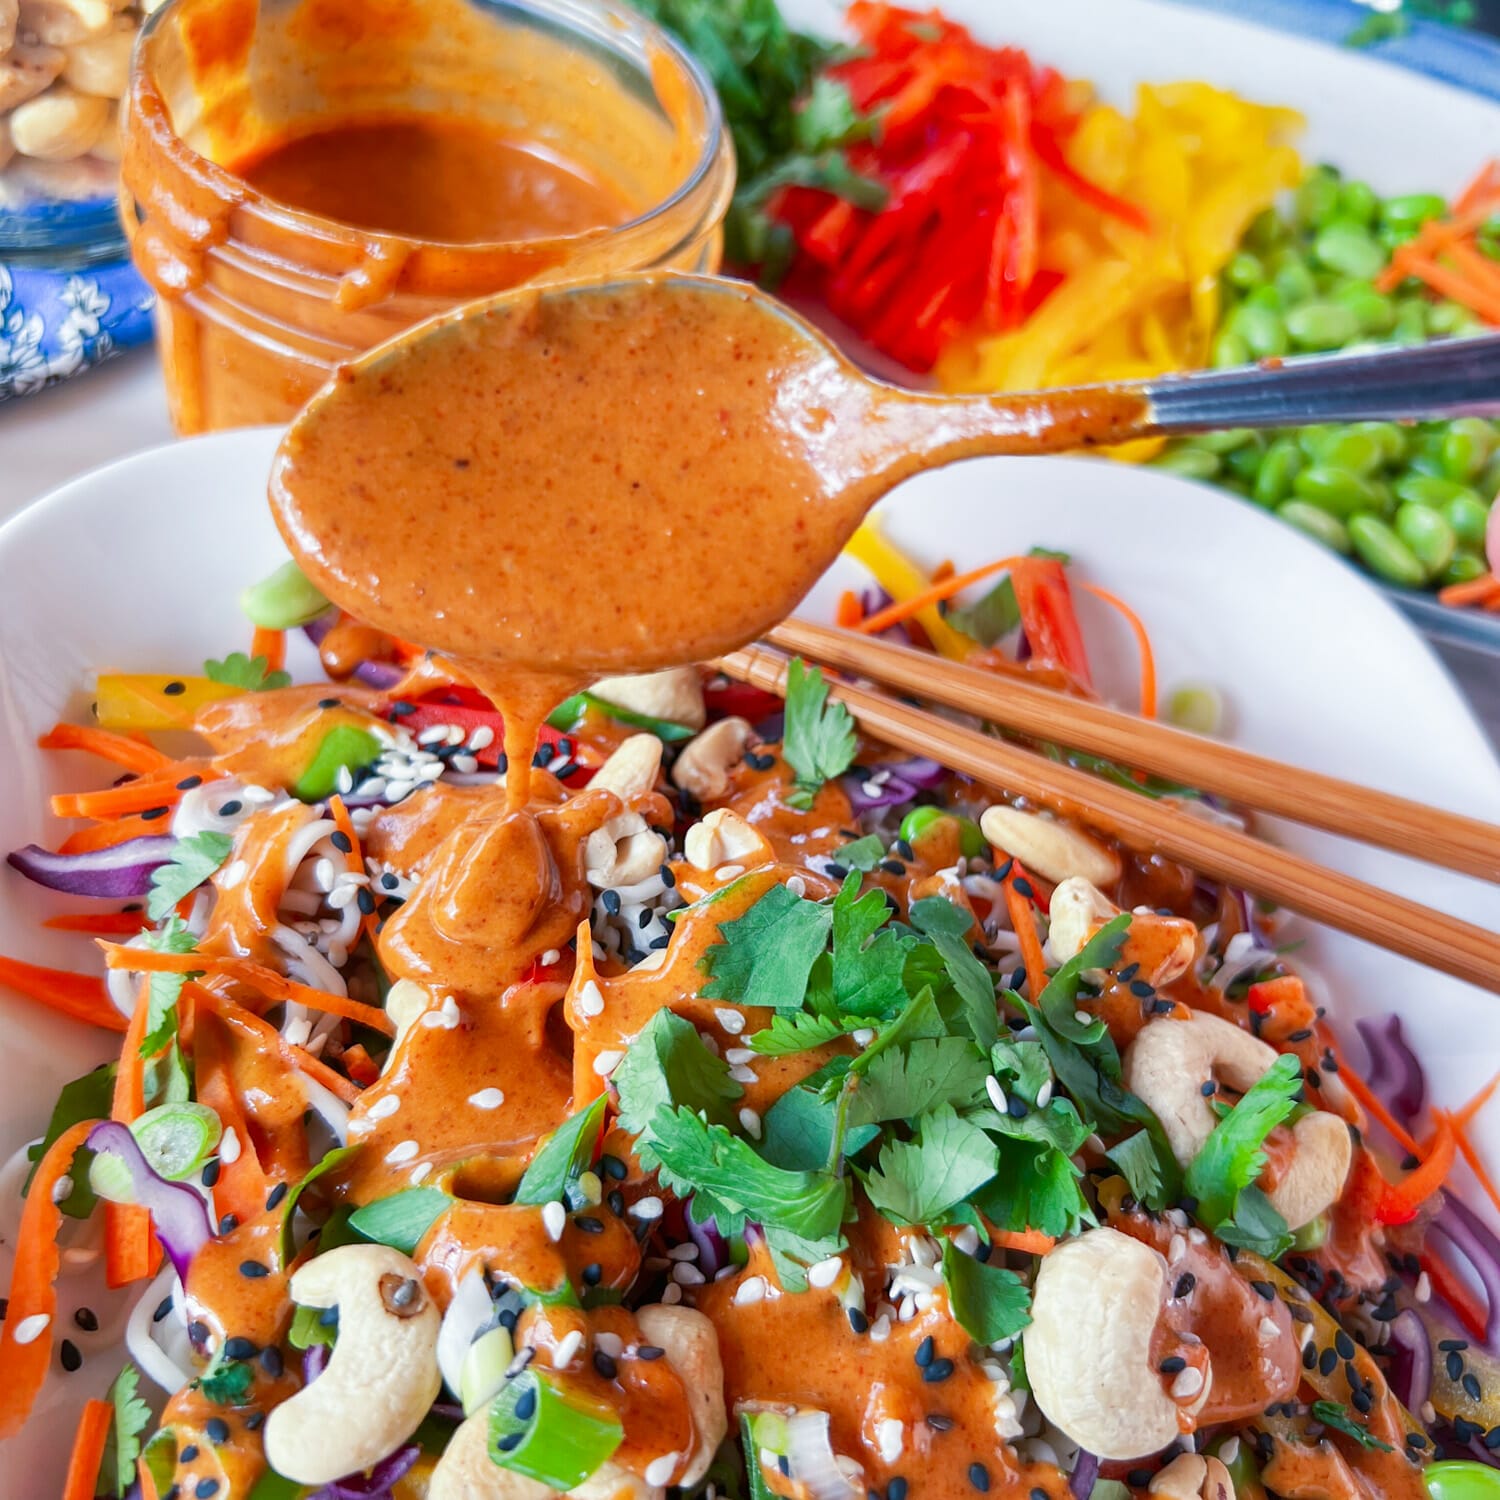 spoon of nut butter dressing over plate of thai power bowl ingredients 